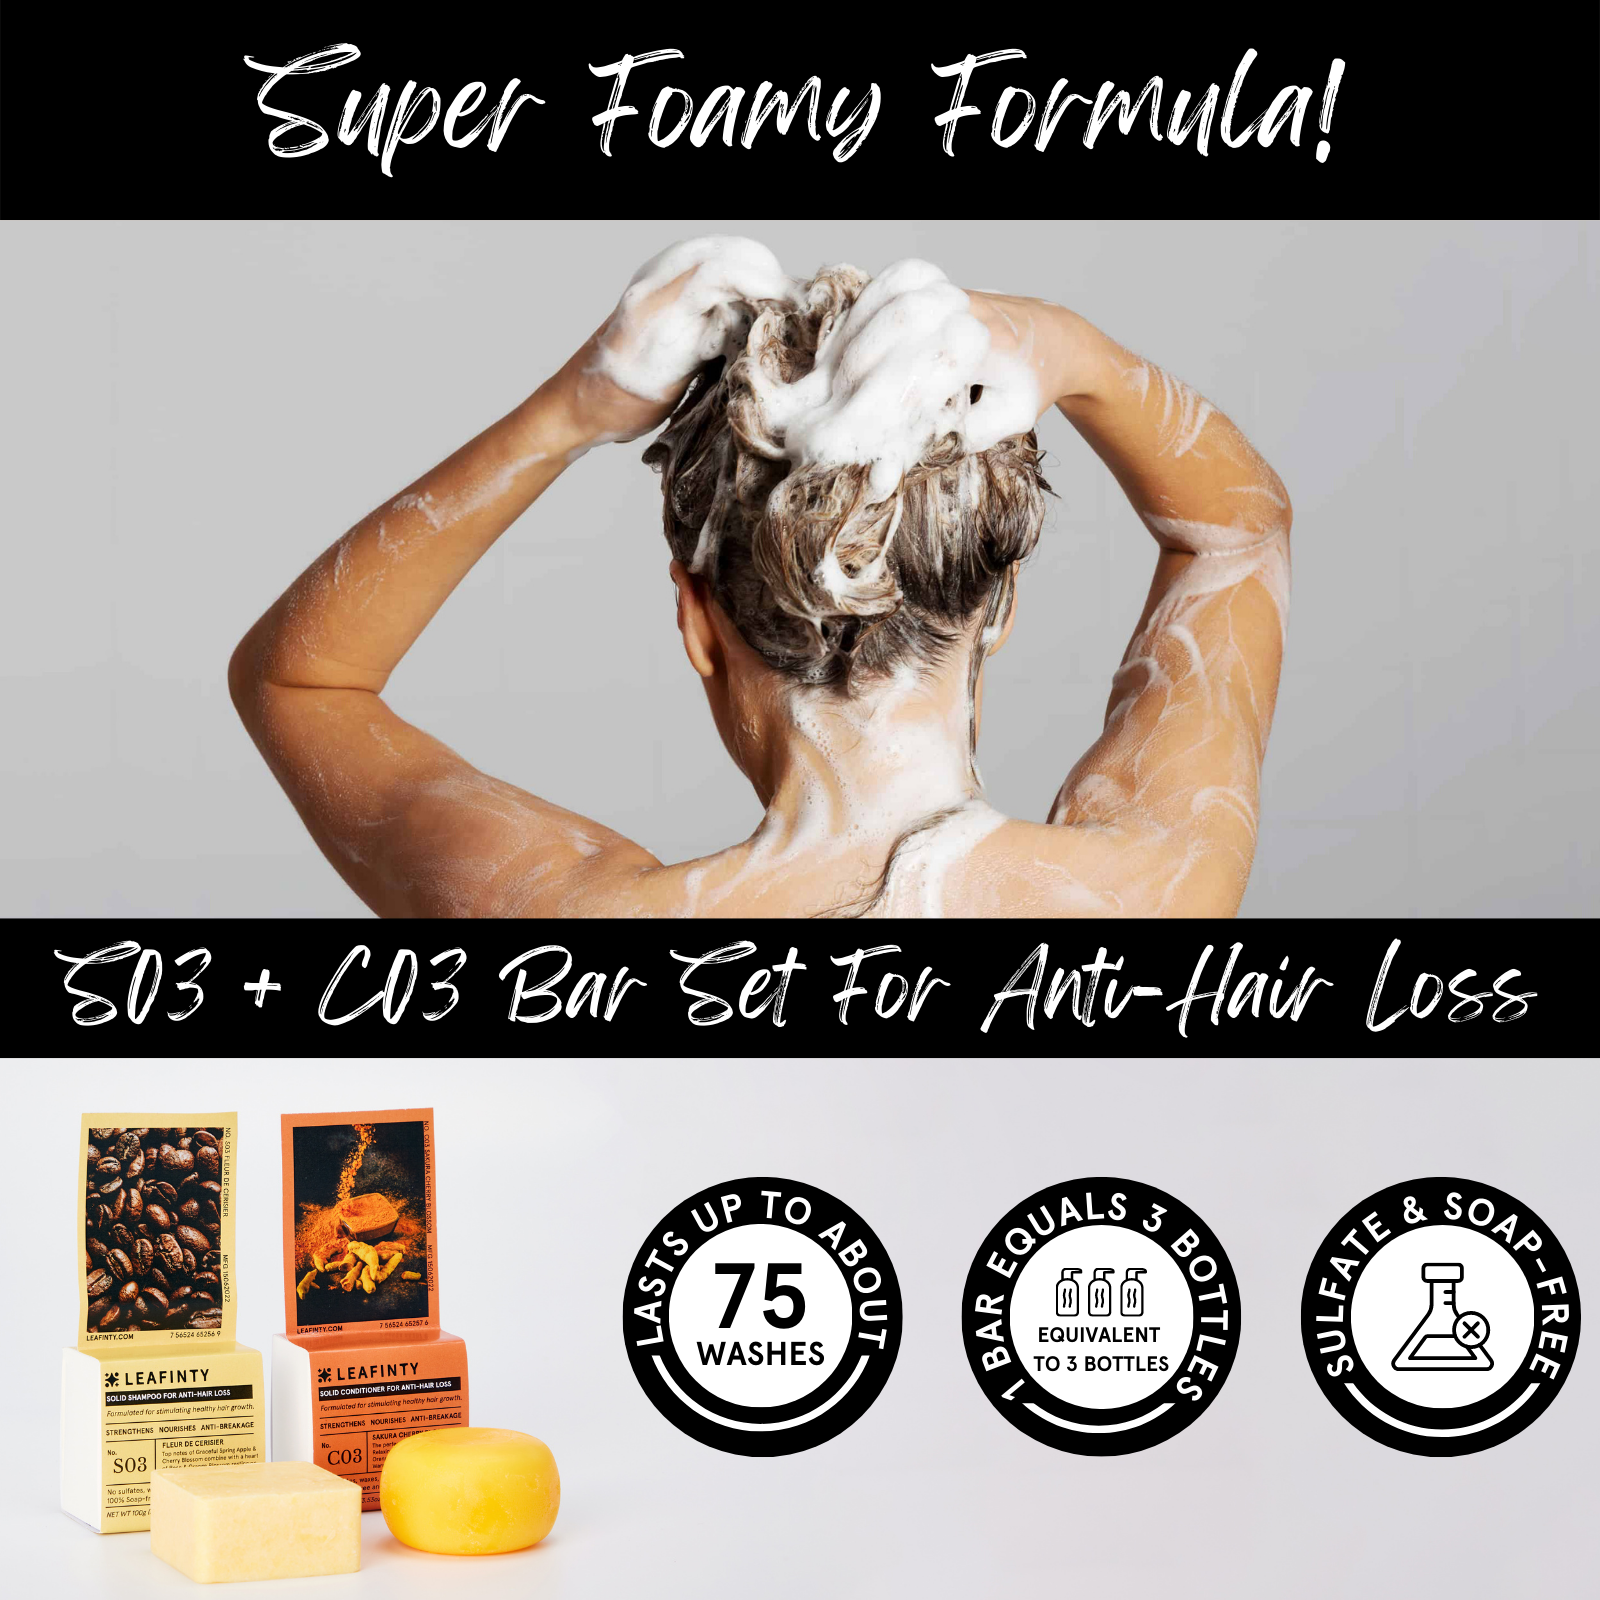 S03+C03 Solid Shampoo & Conditioner Set for Anti-Hair Loss & Healthy Hair Growth